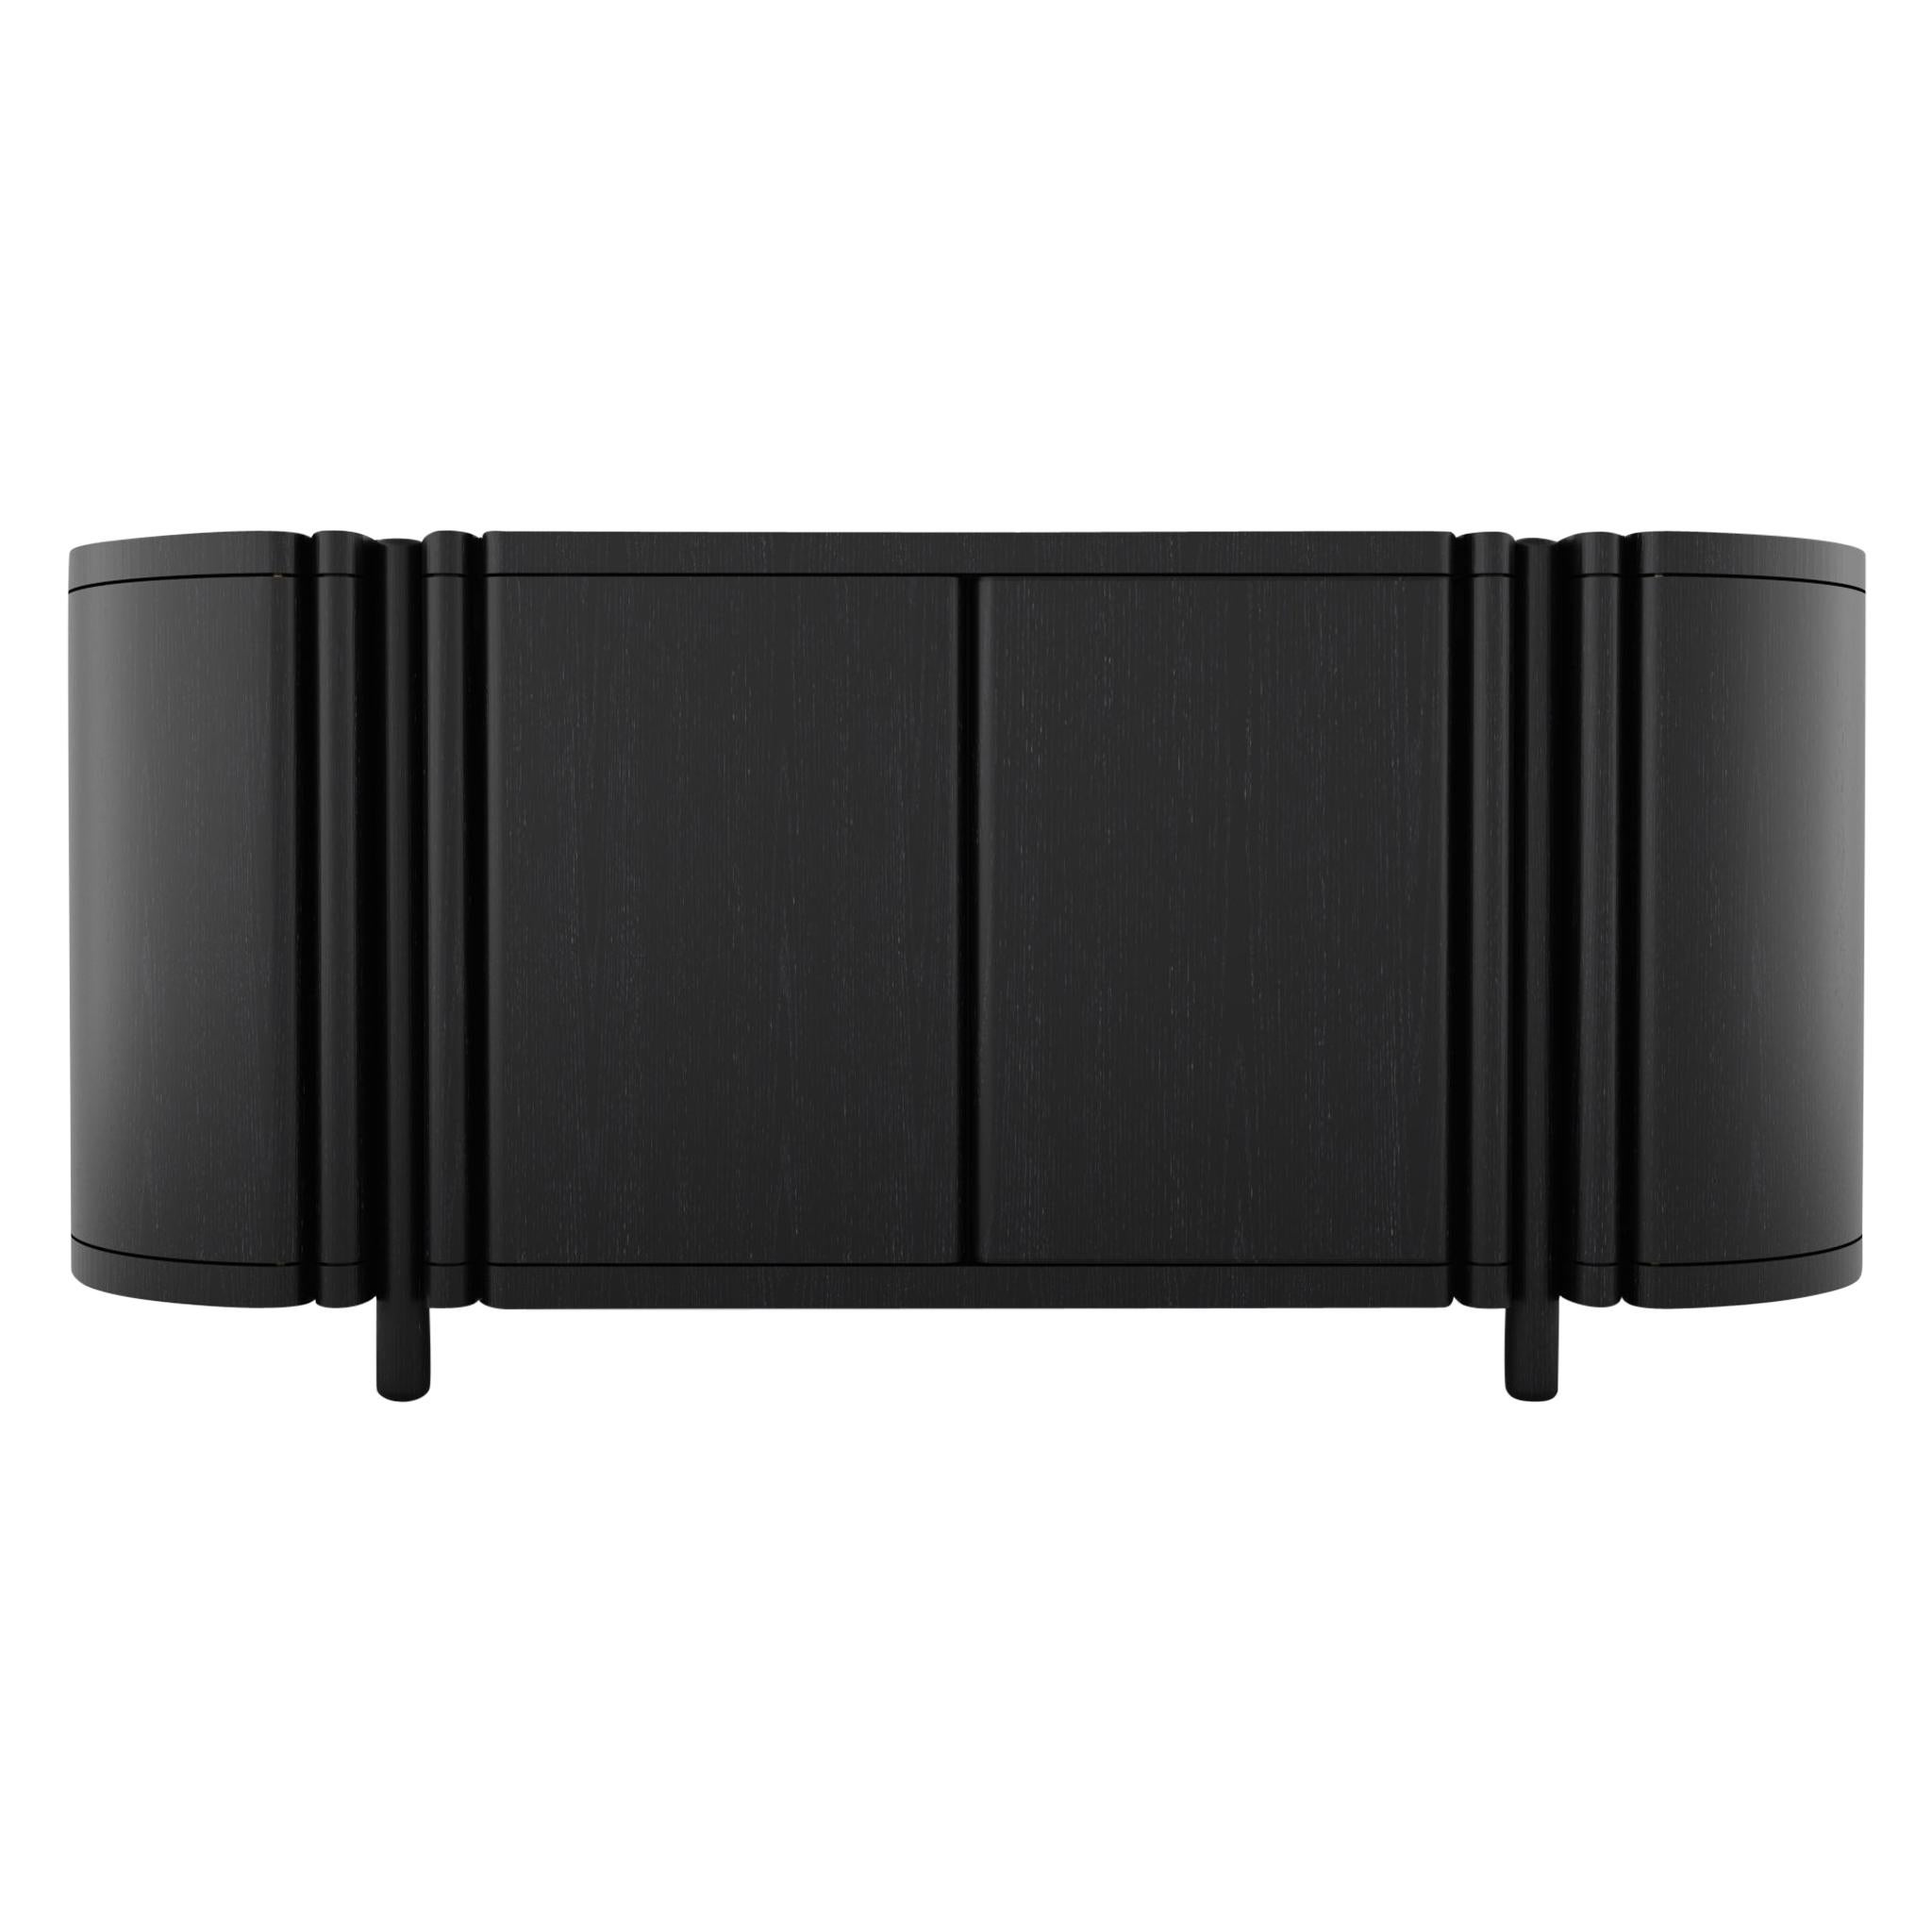 Column Console by Black Table Studio, Black, REP by Tuleste Factory